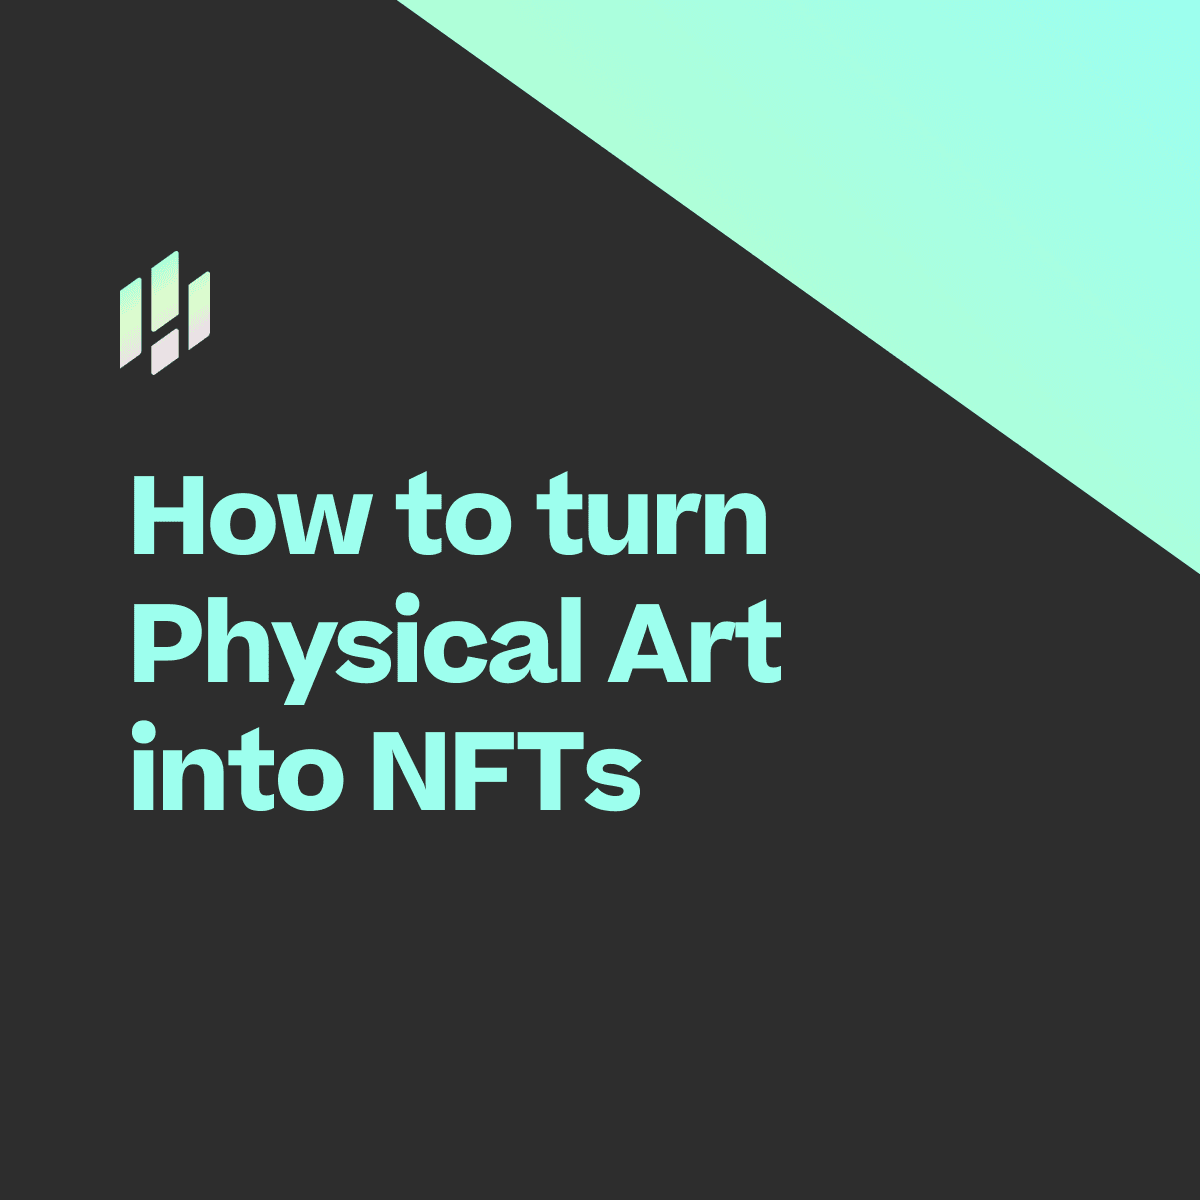 How to turn Physical Art into NFTs